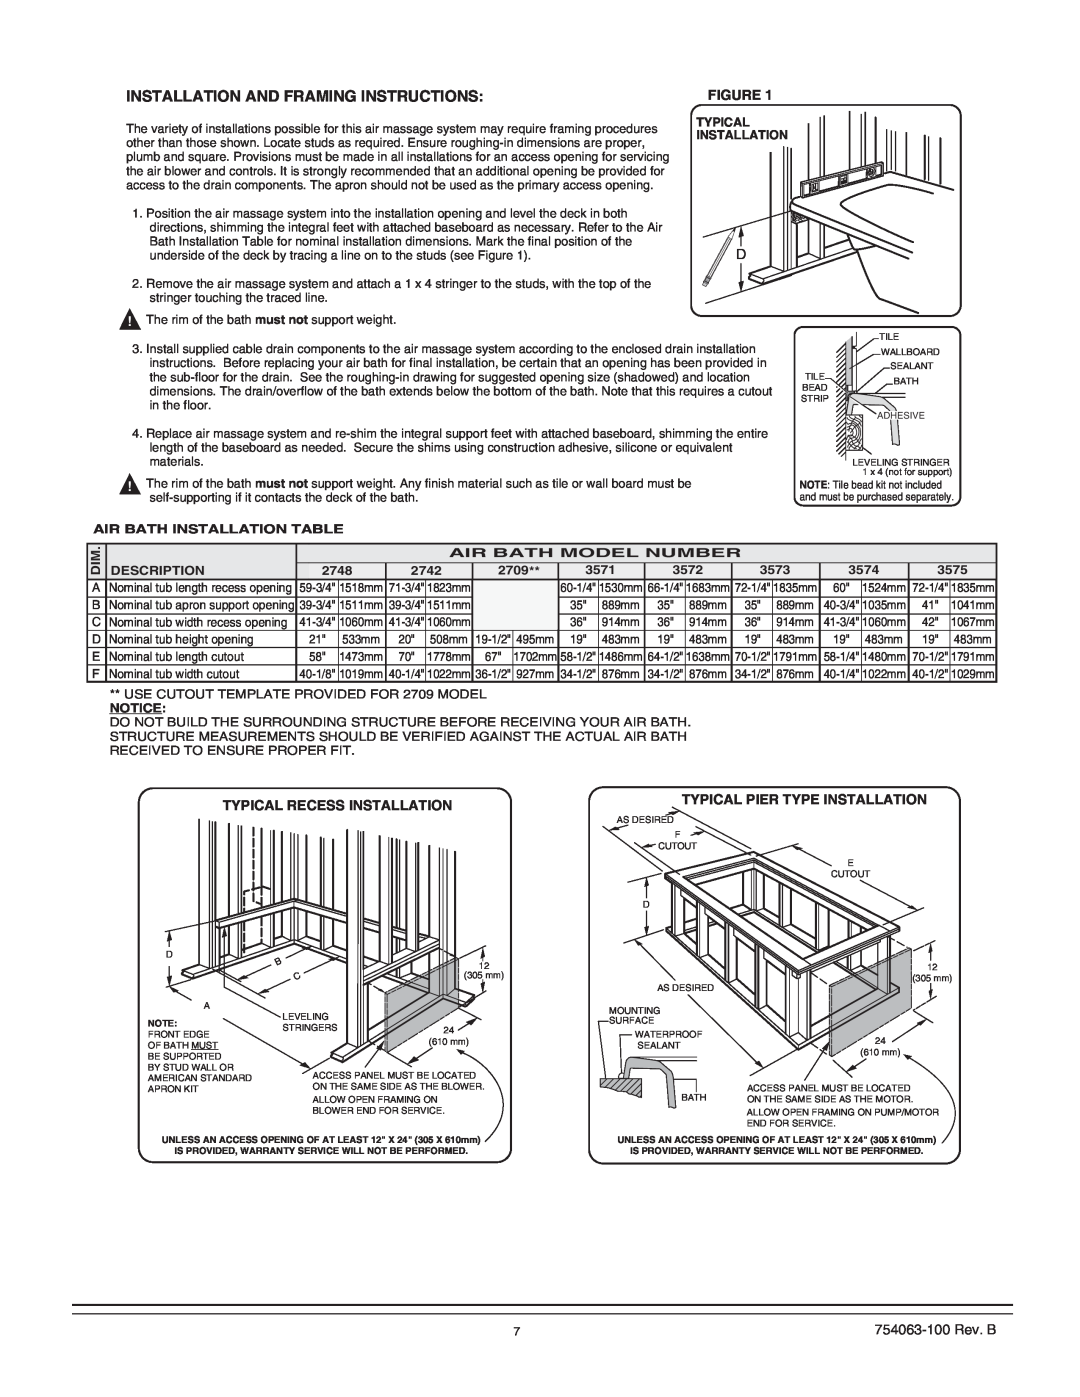 American Standard 3575 Installation And Framing Instructions, Typical Recess Installation, Typical Pier Type Installation 